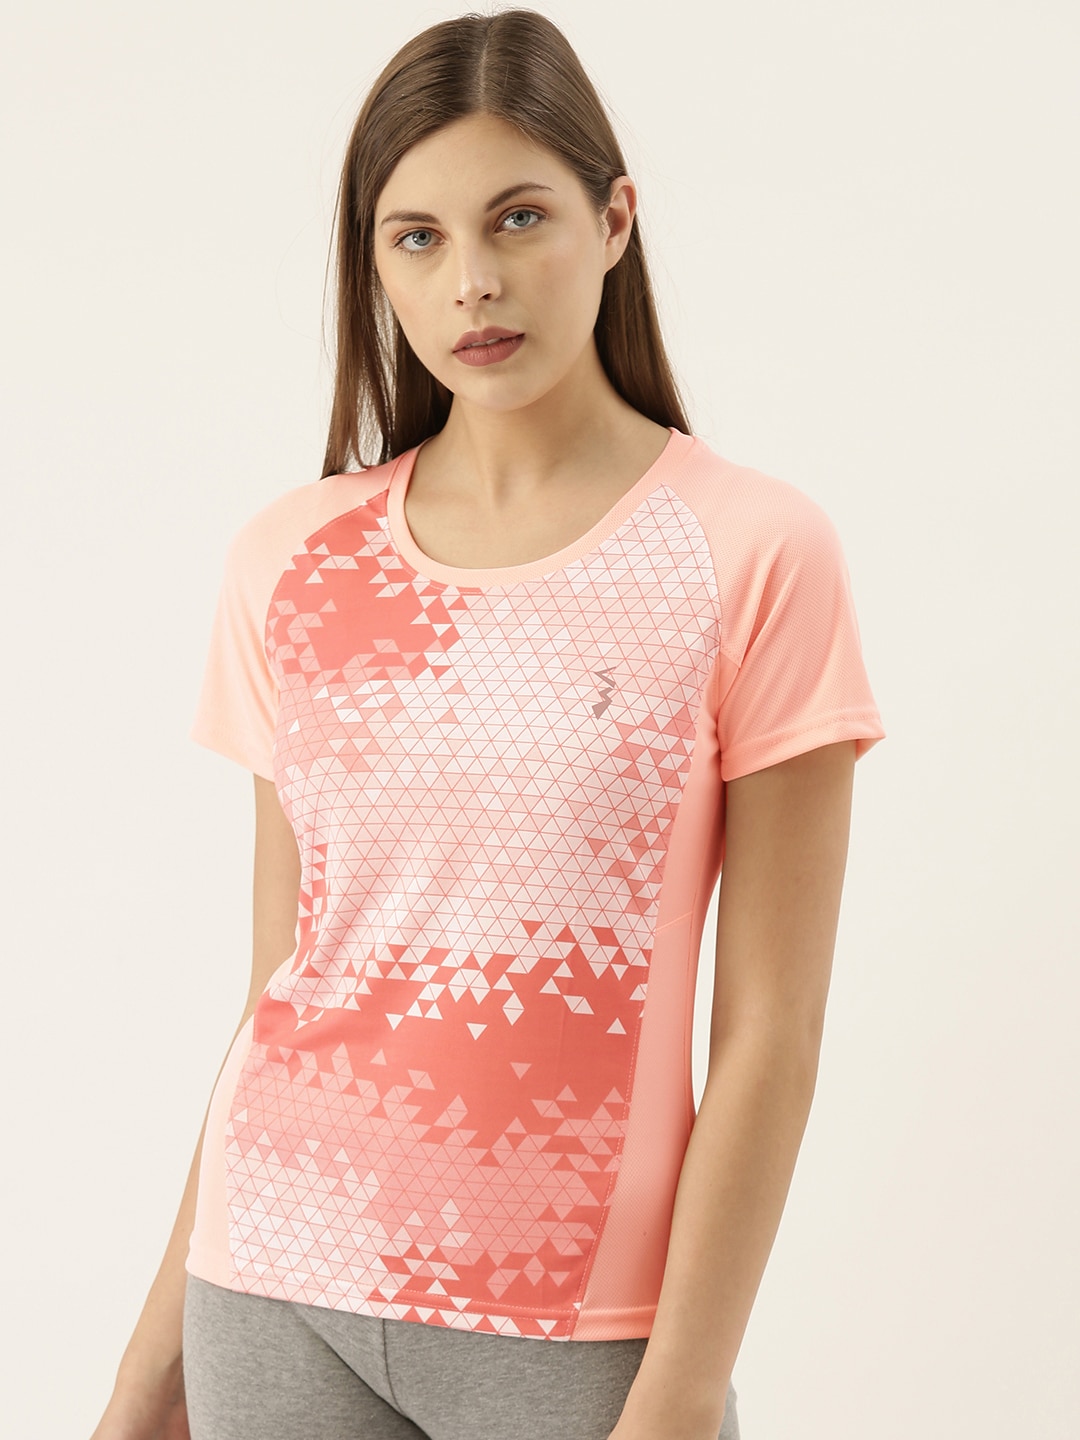 Campus Sutra Women Peach-Coloured Printed Round Neck T-shirt Price in India